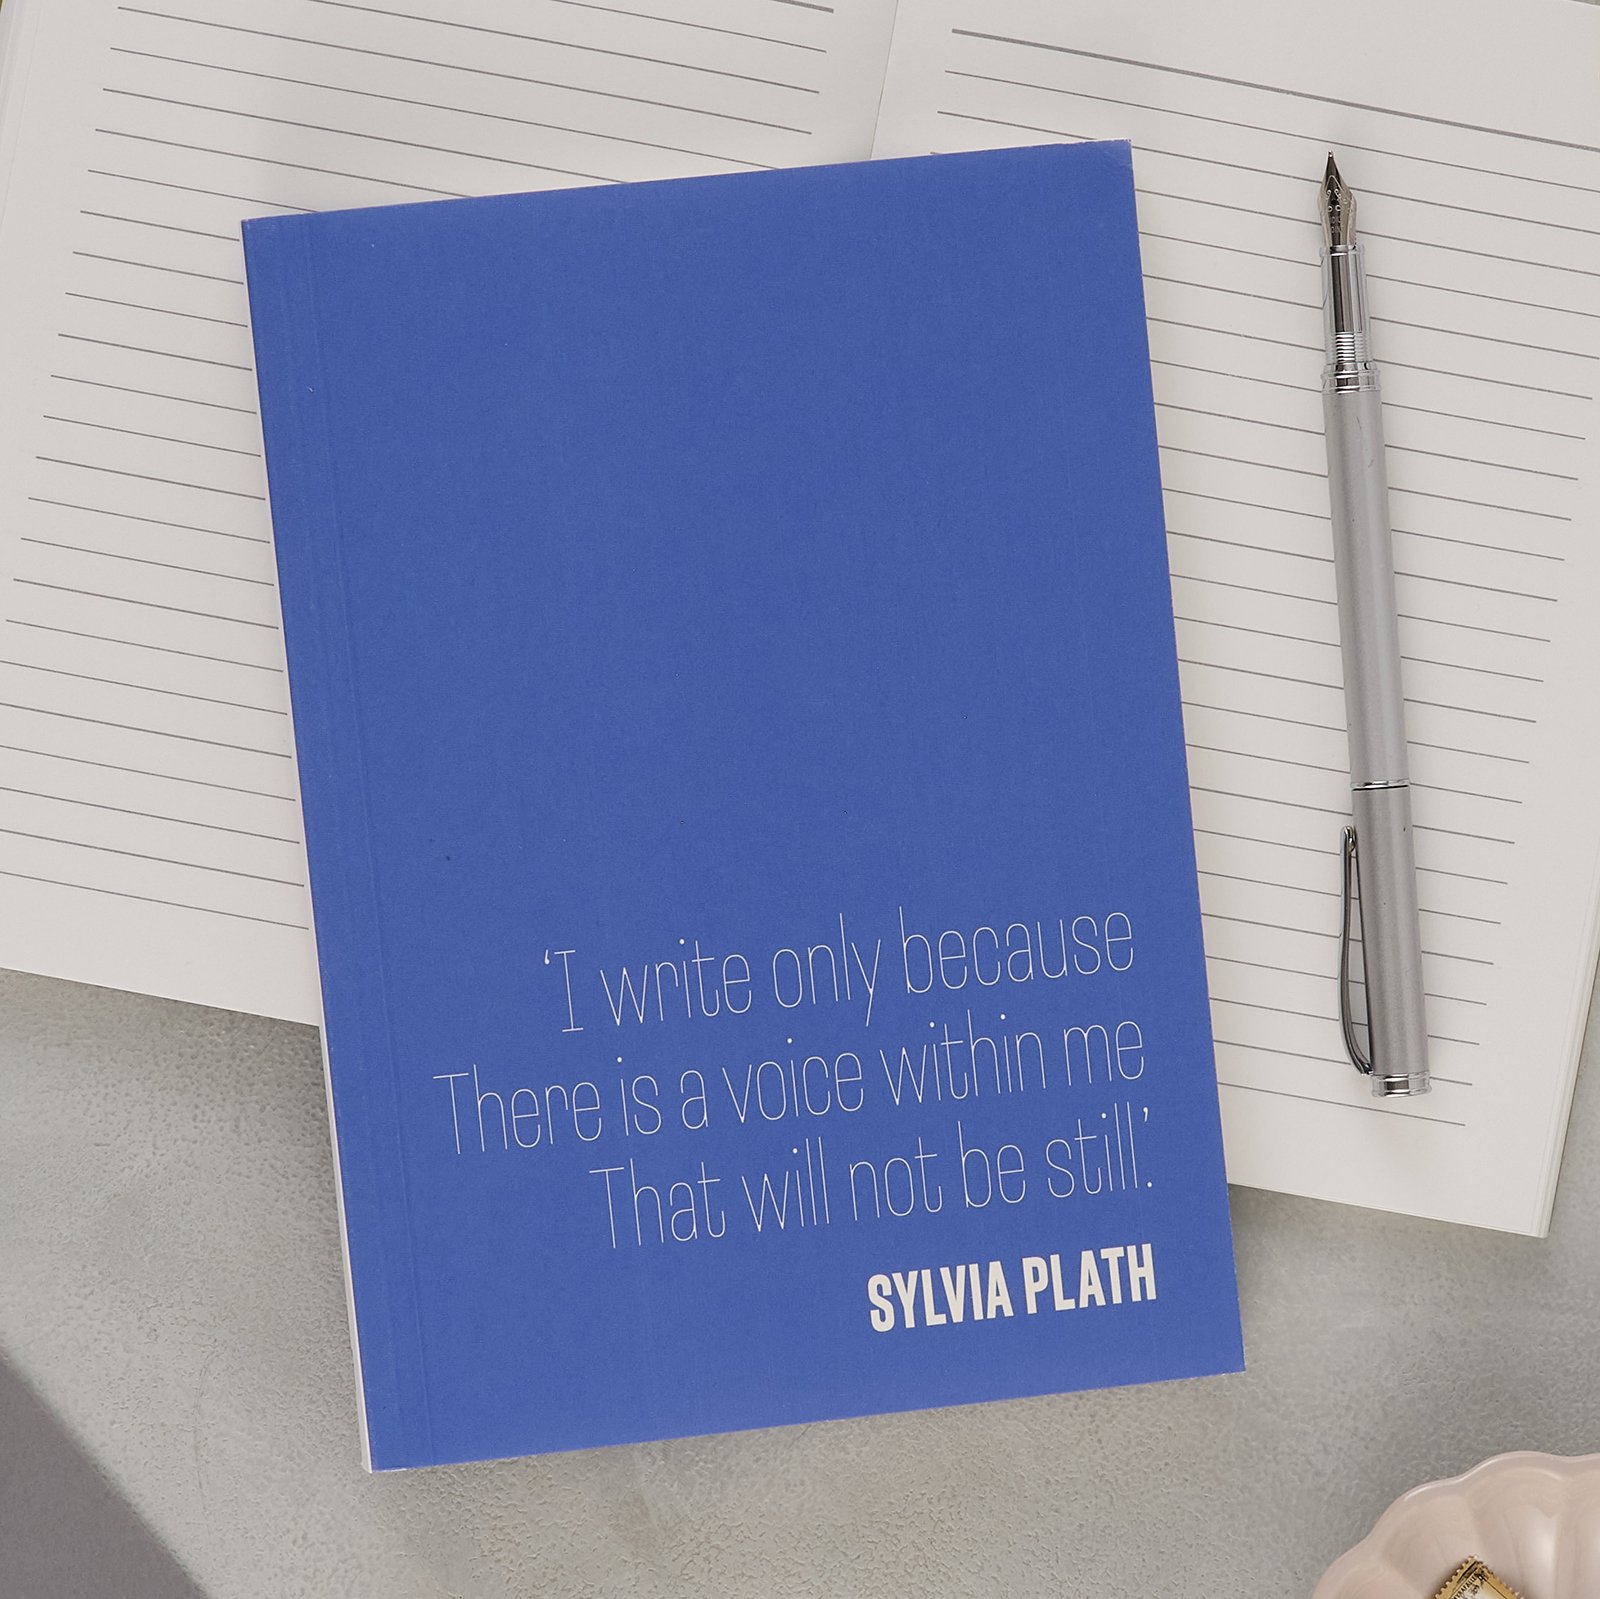 Sylvia Plath Quote the Bell Jar Print, Book Lovers Gifts, Digital Download  Print, I Am, I Am, I Am 